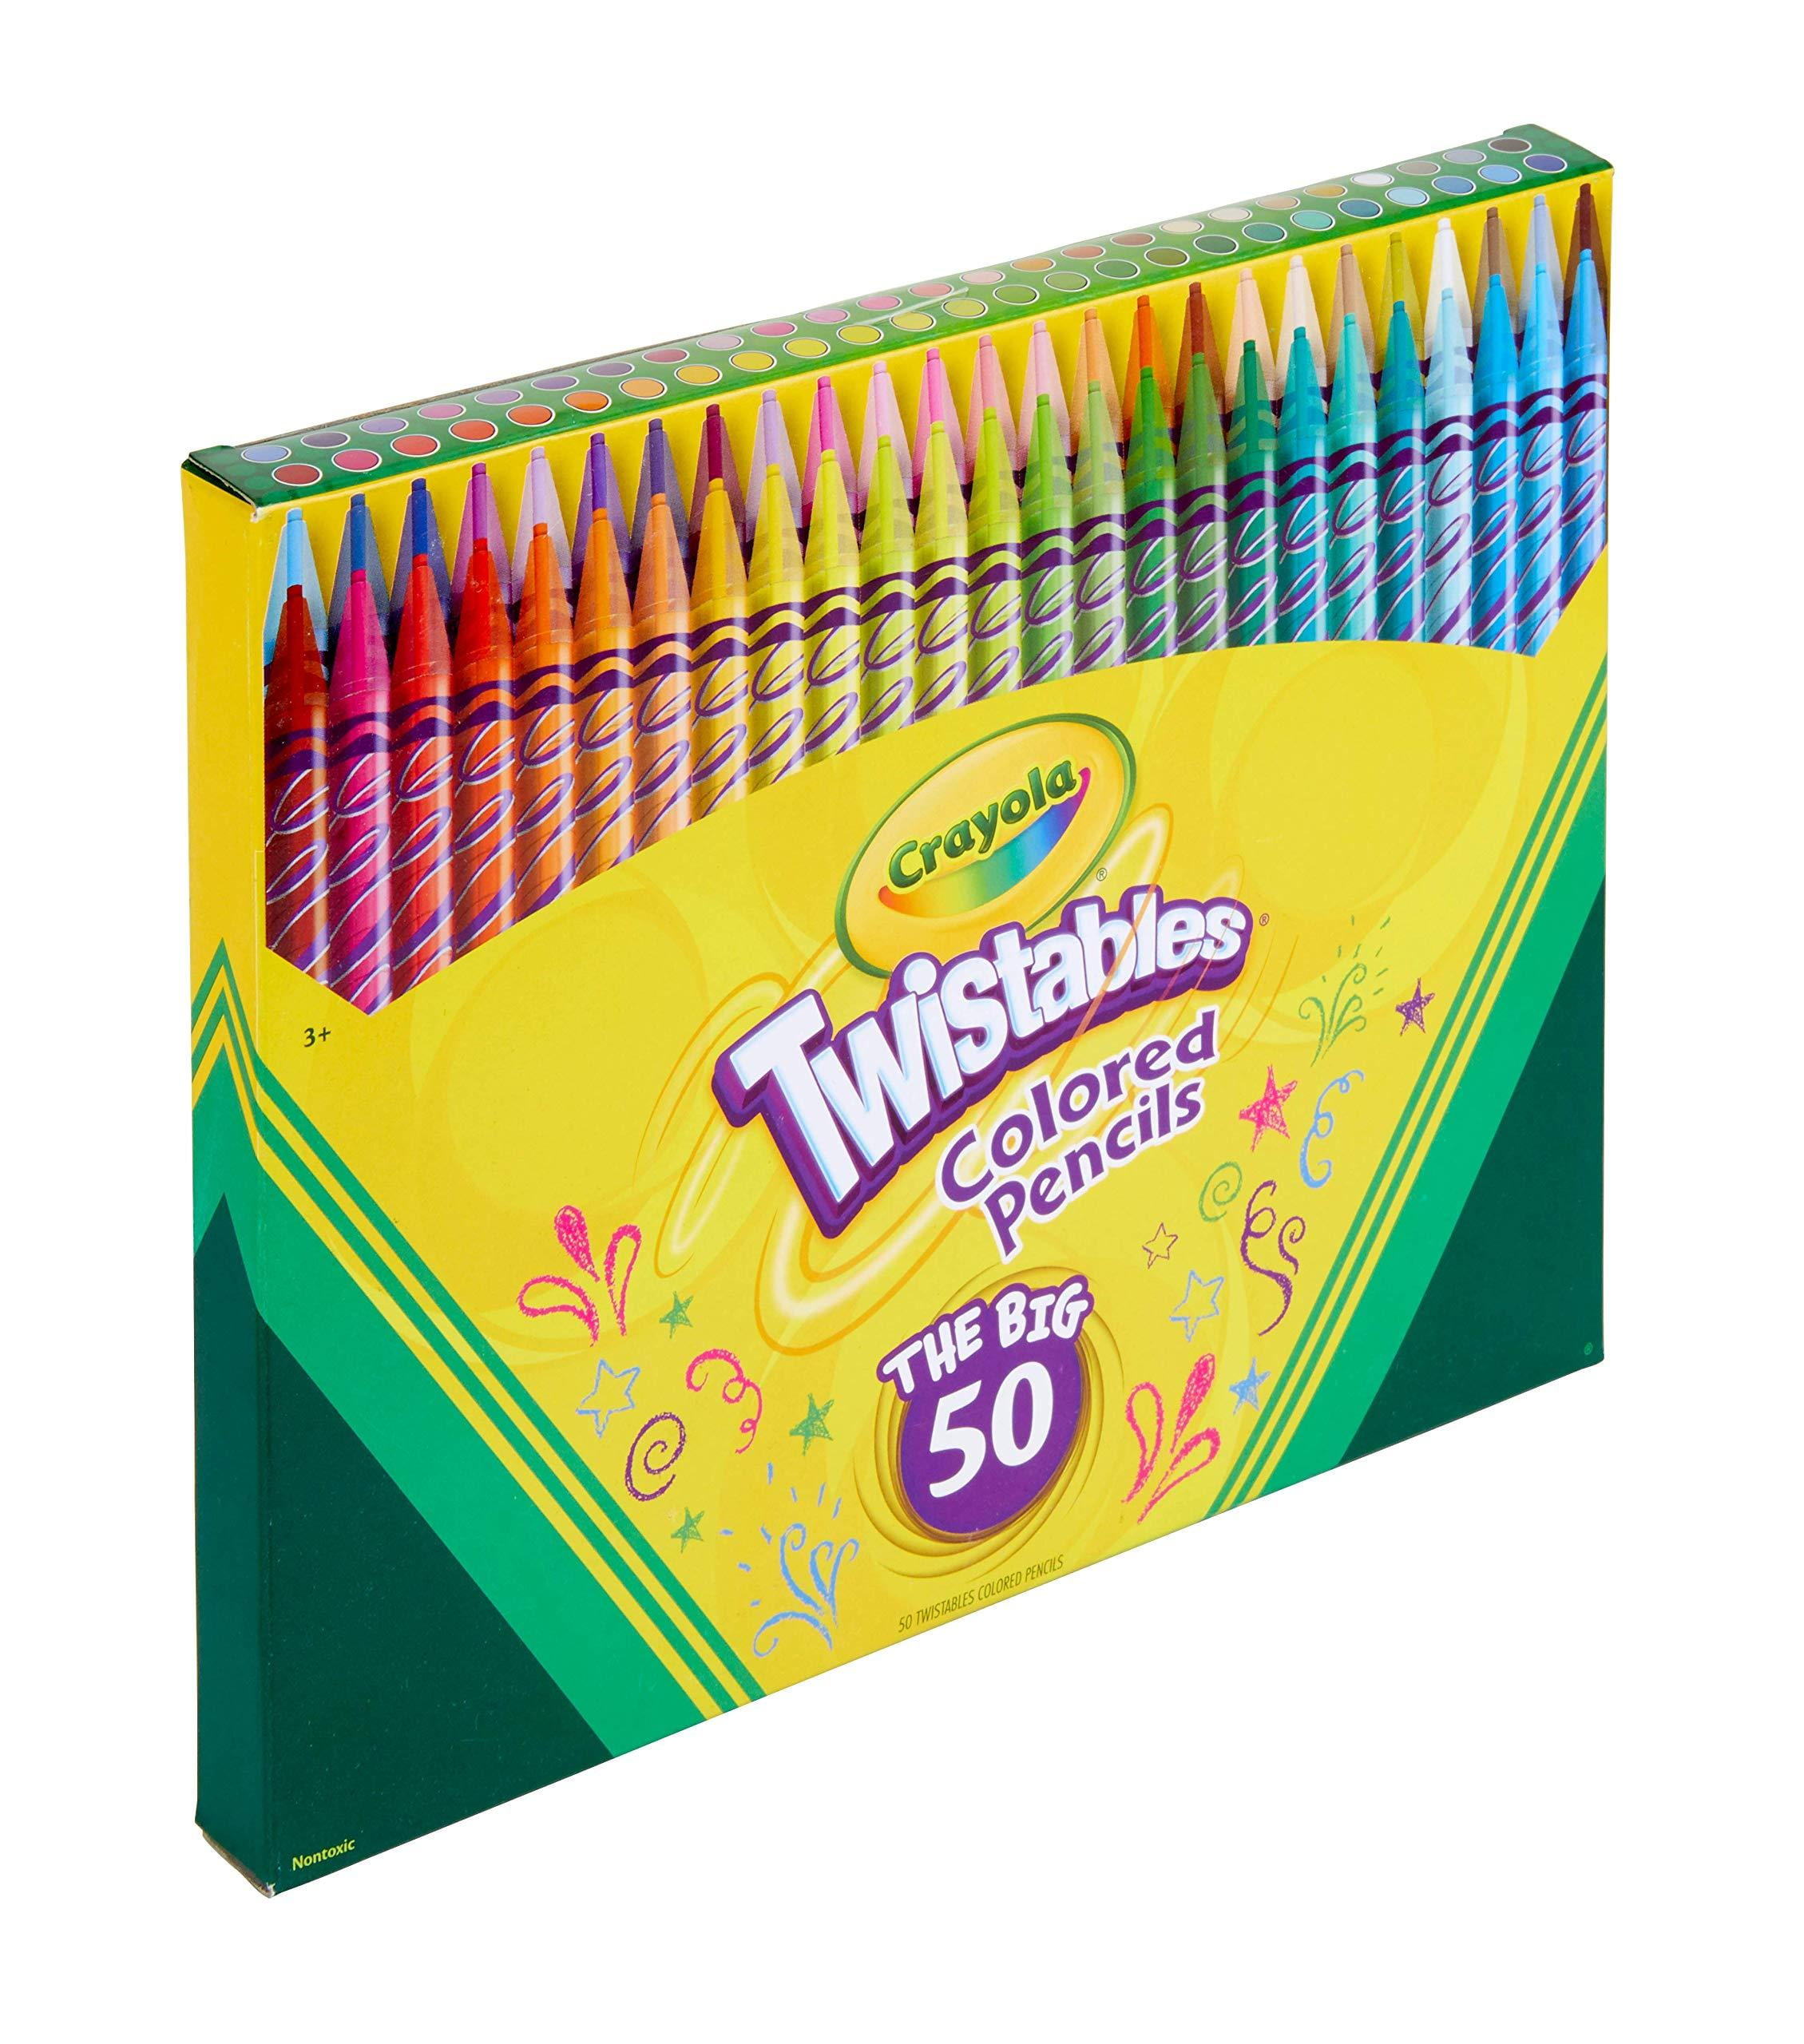 Crayola Twistables Colored Pencil Set (50ct), No Sharpen Colored Pencils  For Kids, Kids Art Supplies, Coloring Set, Gifts, 4+ [ Exclusive]